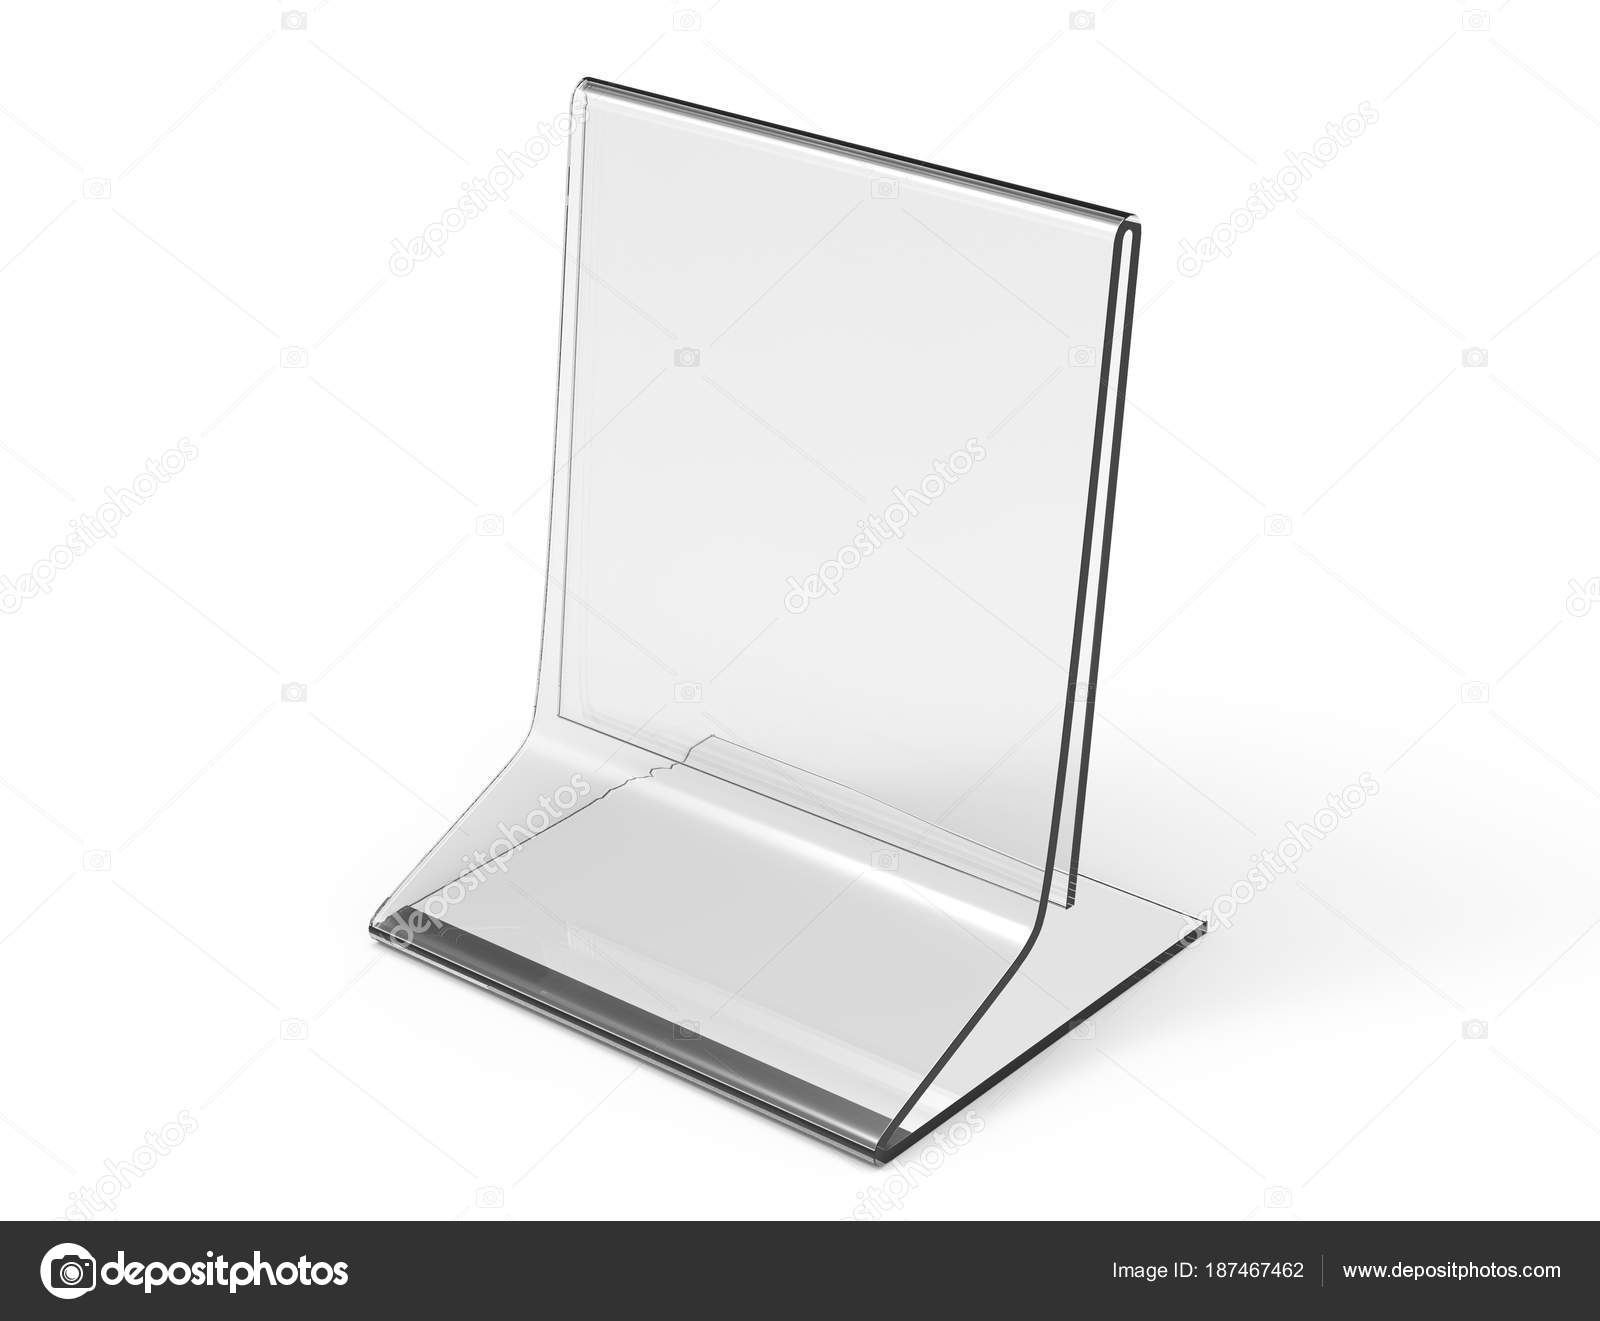 Download Acrylic Stand Mockup Royalty Free Photo Stock Image By C Kchungtw 187467462